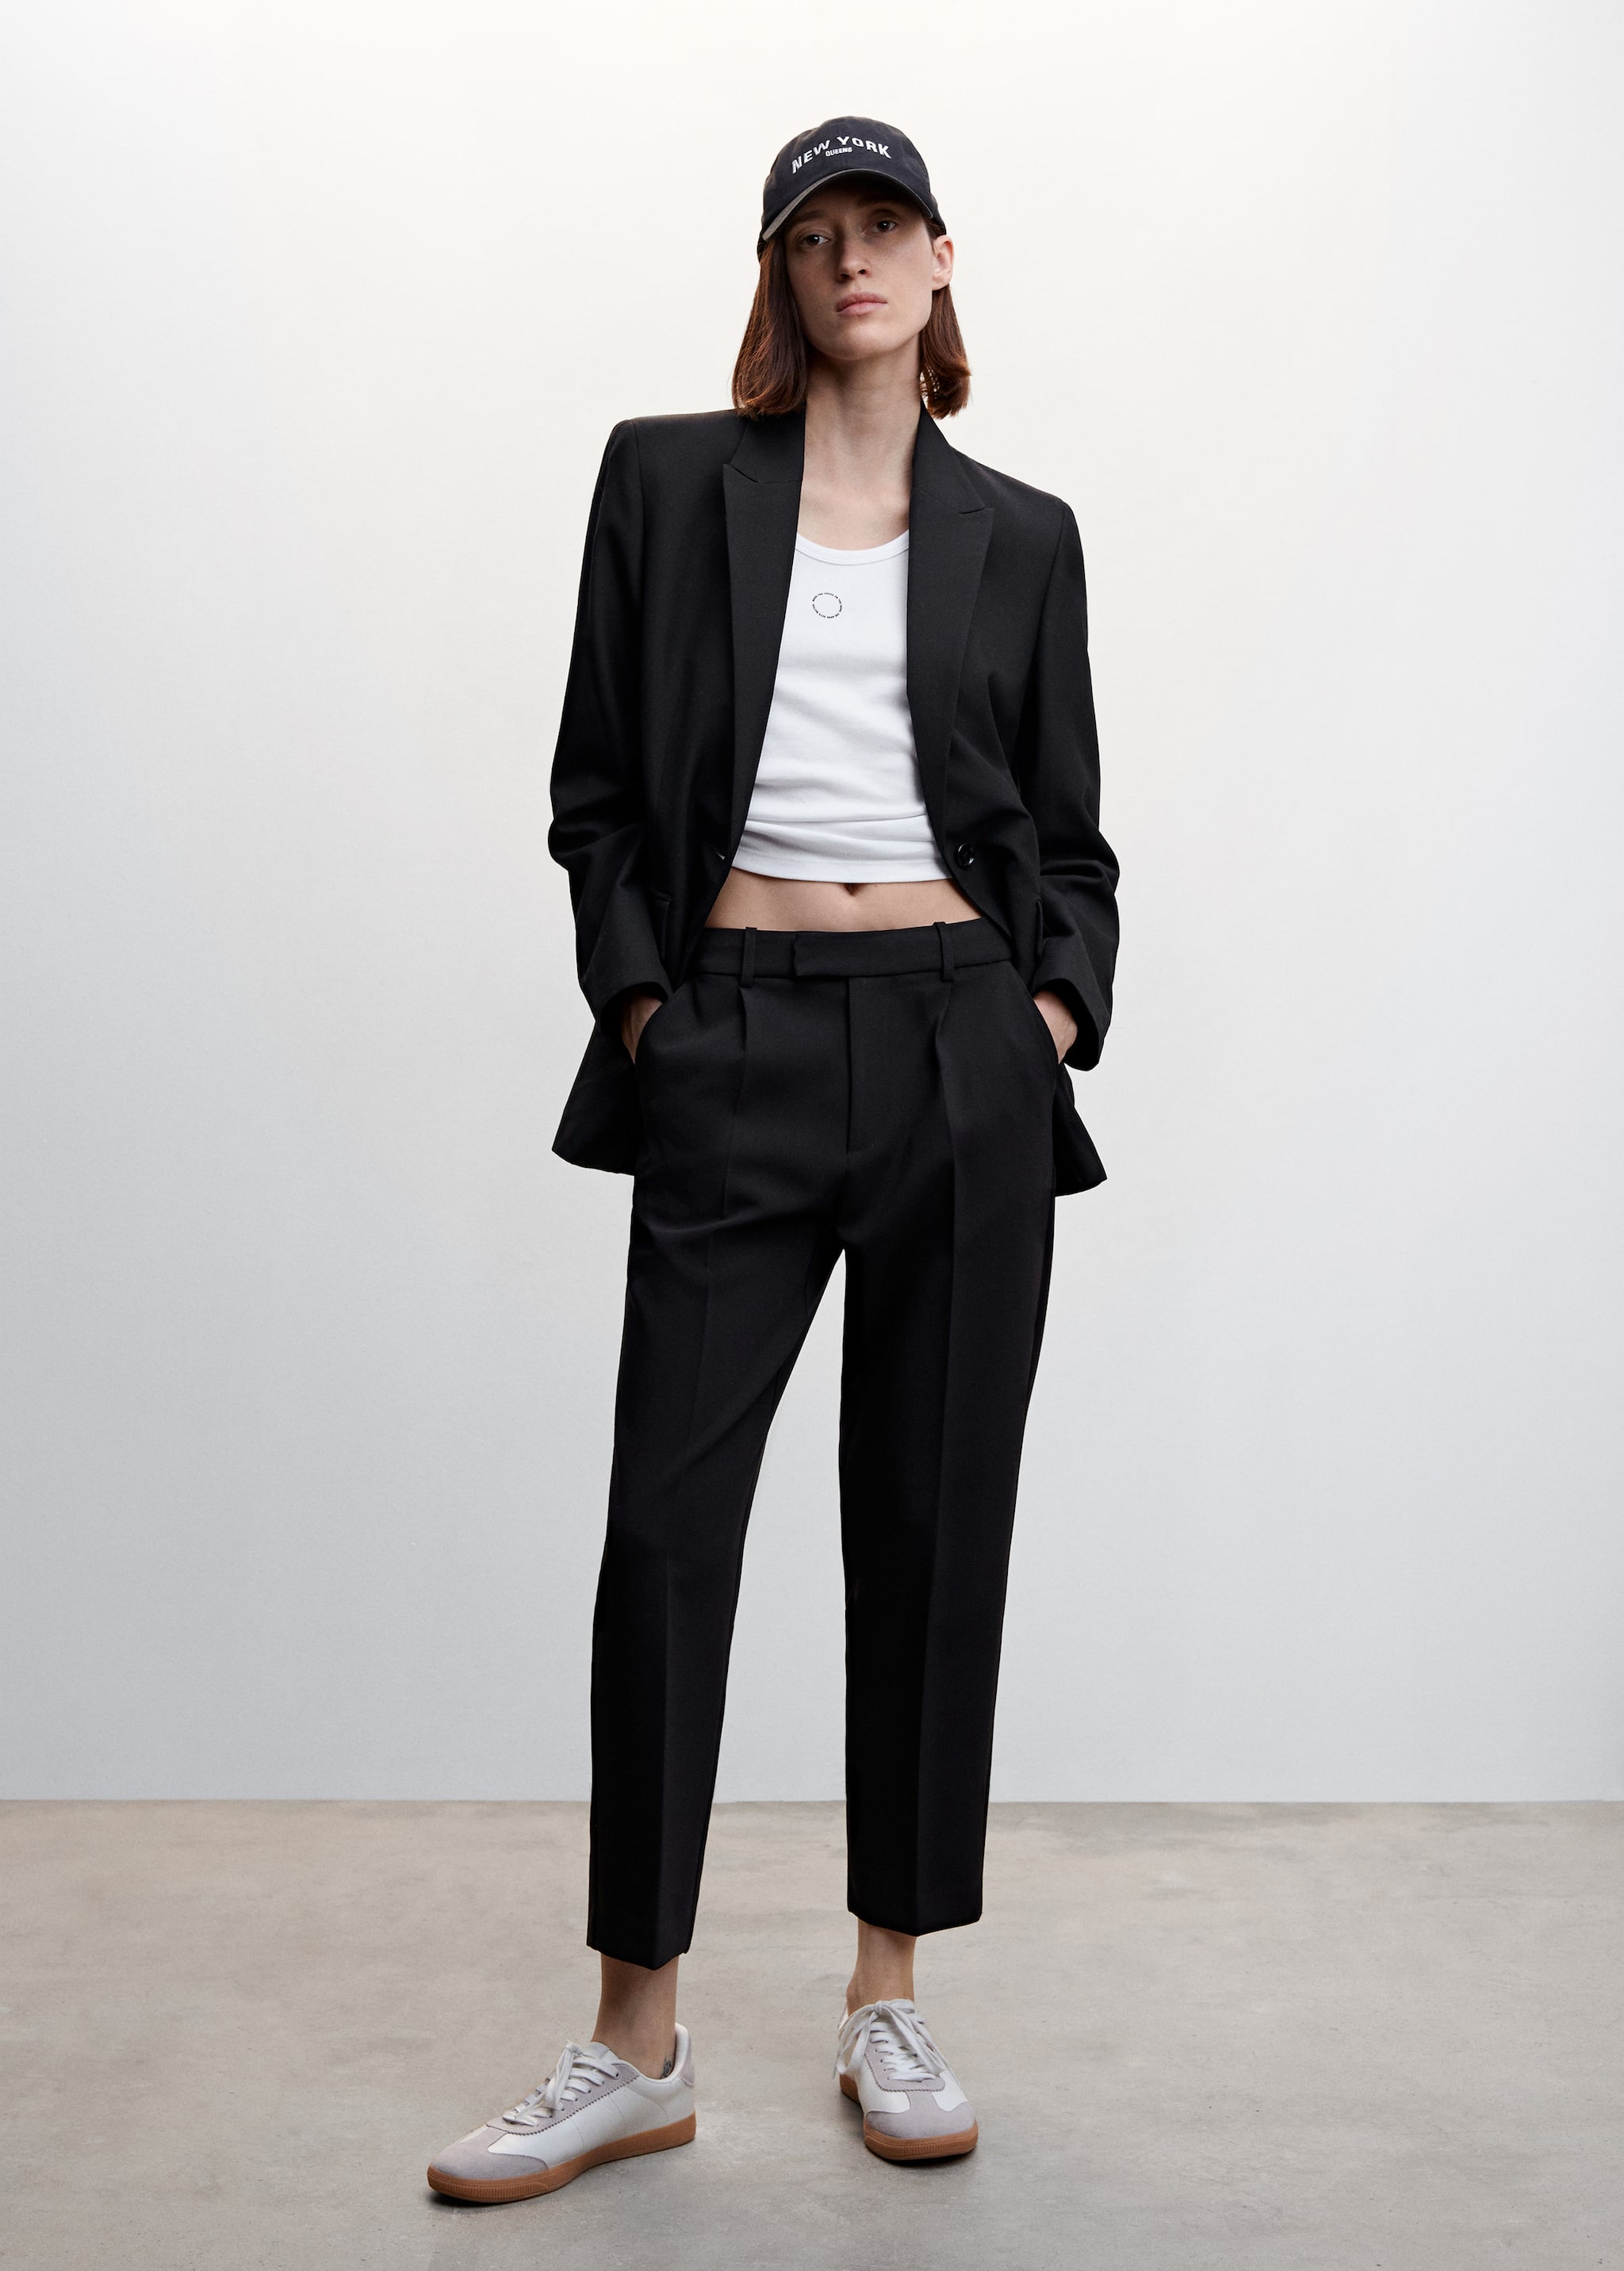 Pleat straight trousers - General plane